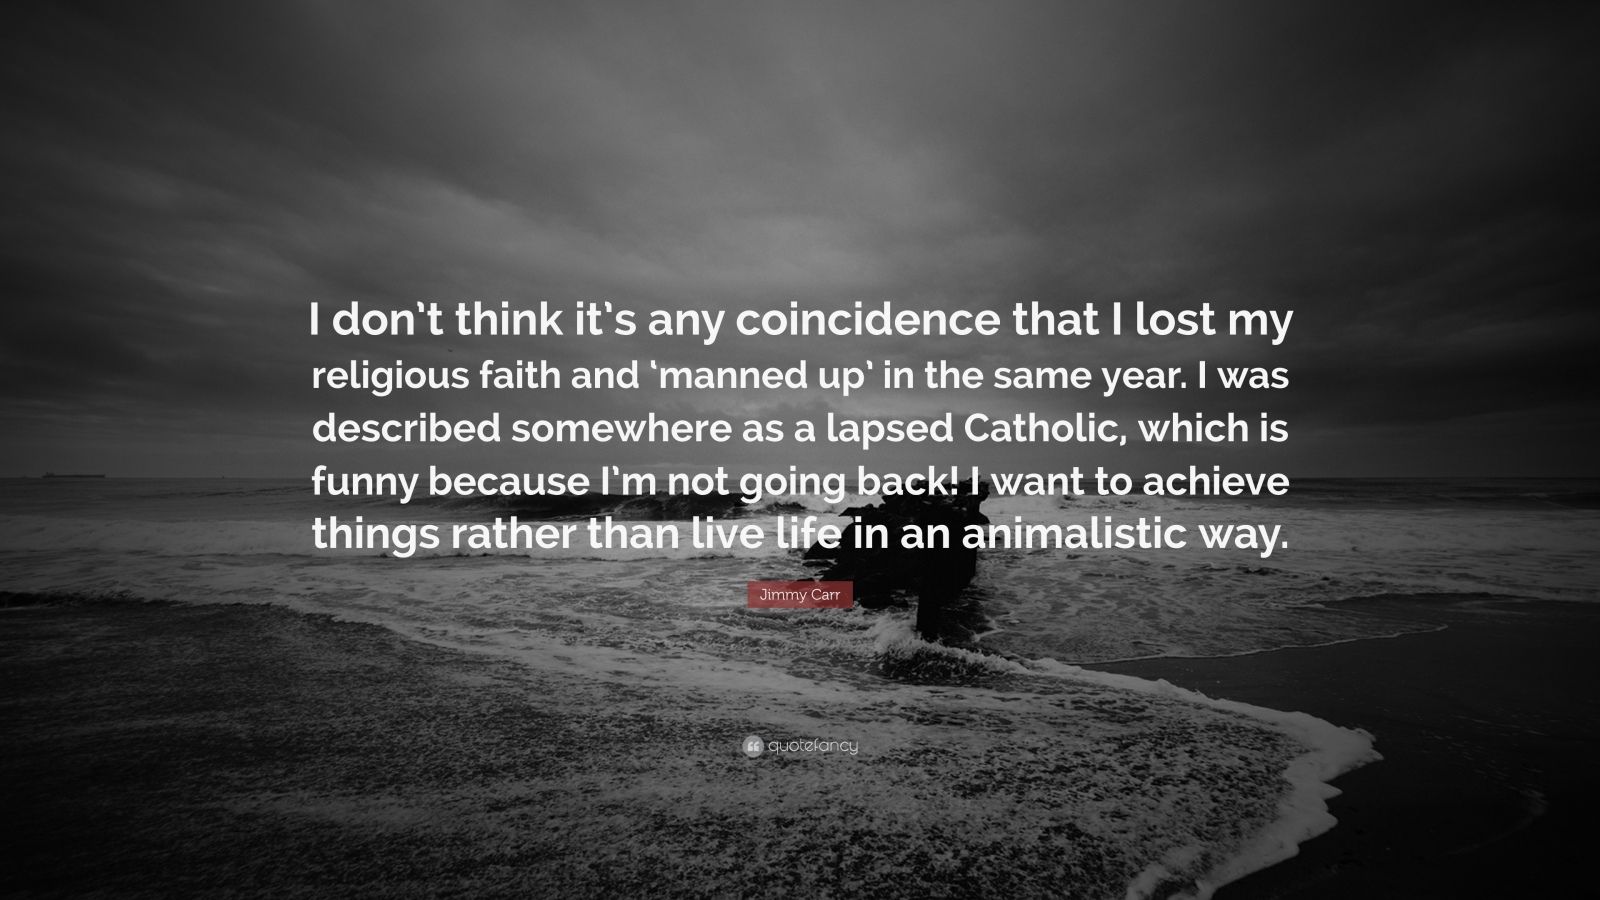 Jimmy Carr Quote: “I don't think it's any coincidence that I lost my  religious faith and 'manned up' in the same year. I was described some...”